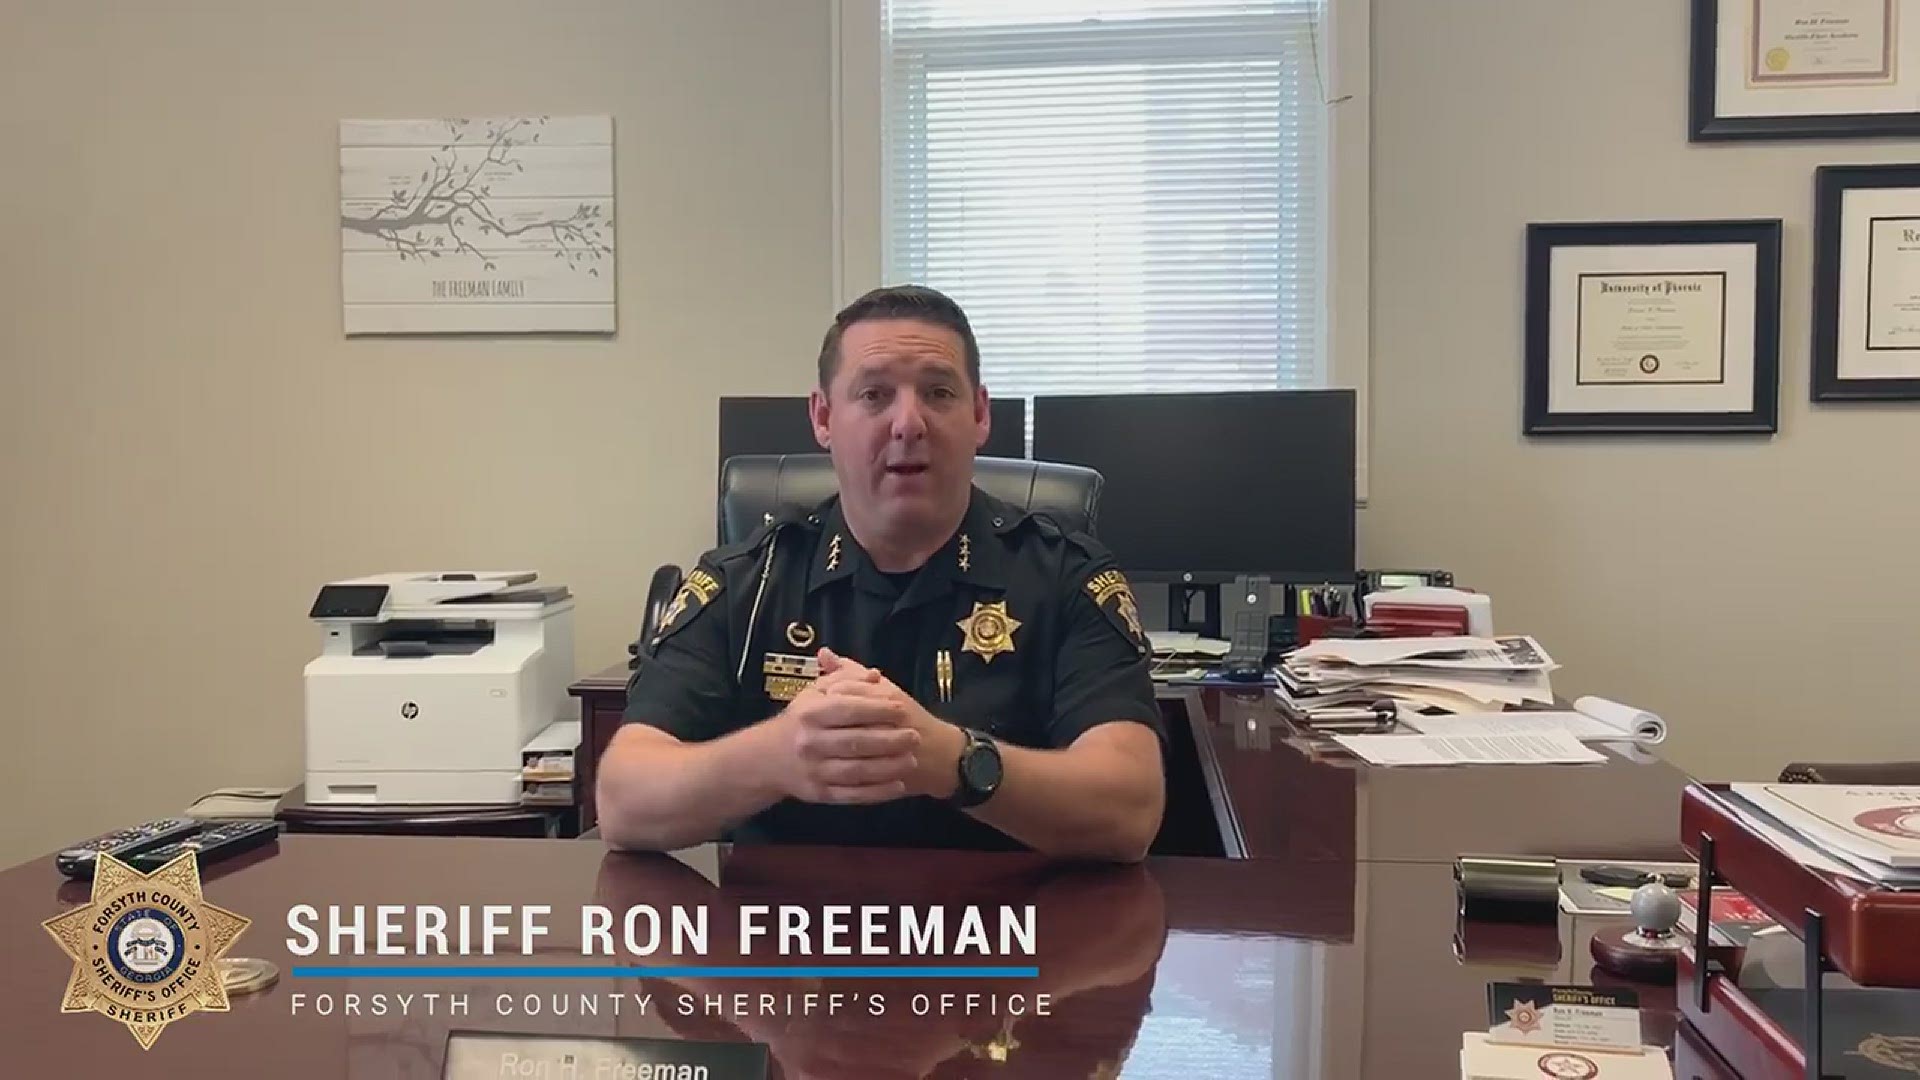 Sheriff asks online users to avoid personal questionnaires.